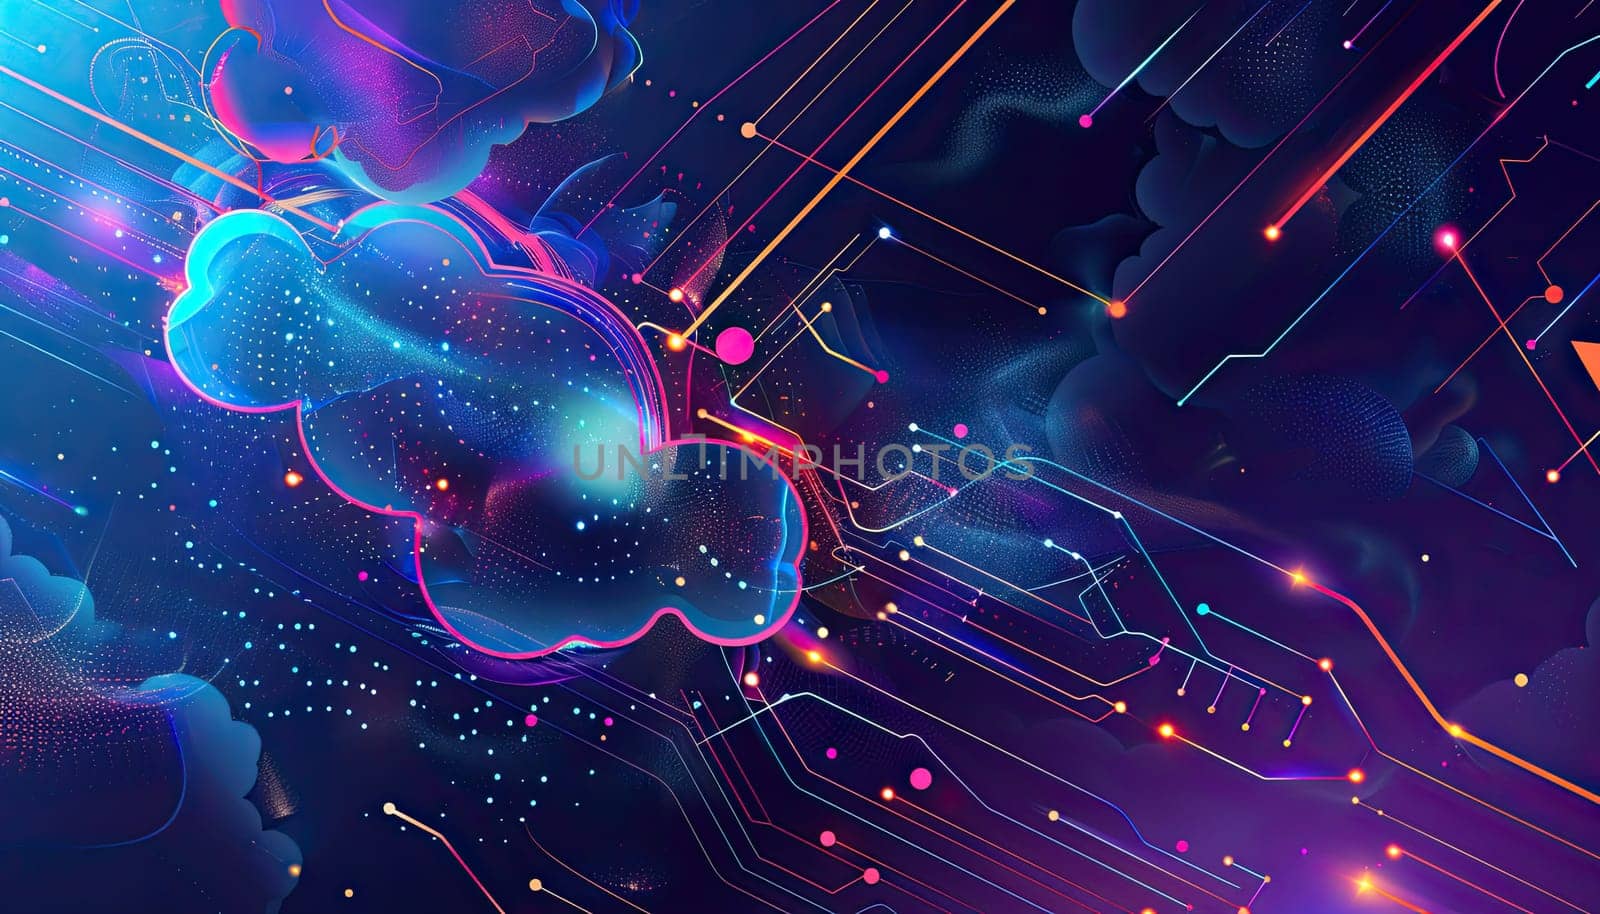 A colorful, abstract image of a cloud with a network of lines by AI generated image.